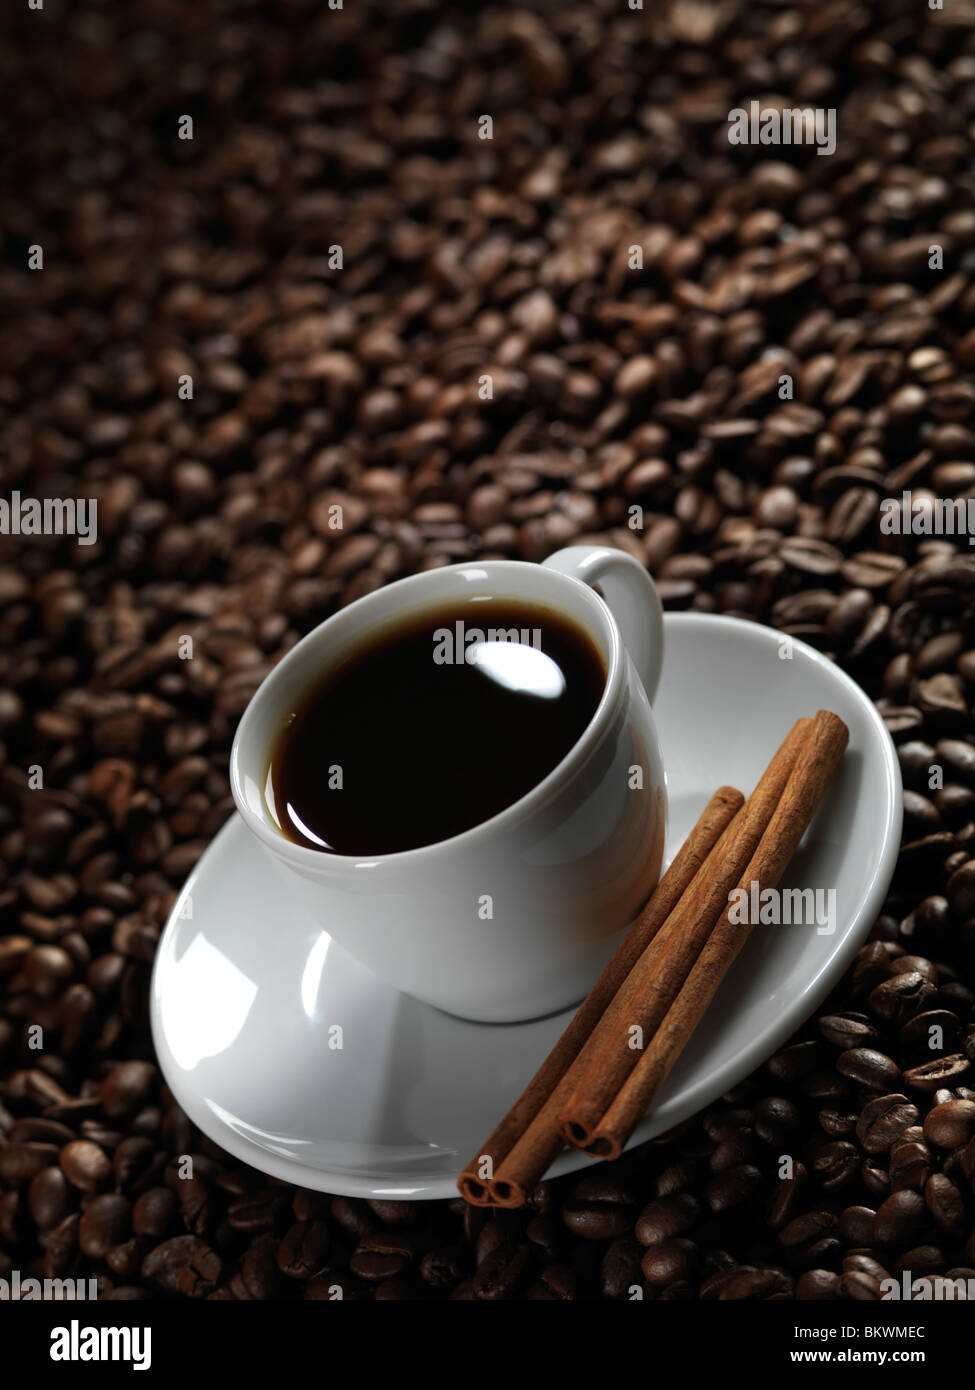 White cup of coffee on coffe beans background Stock Photo